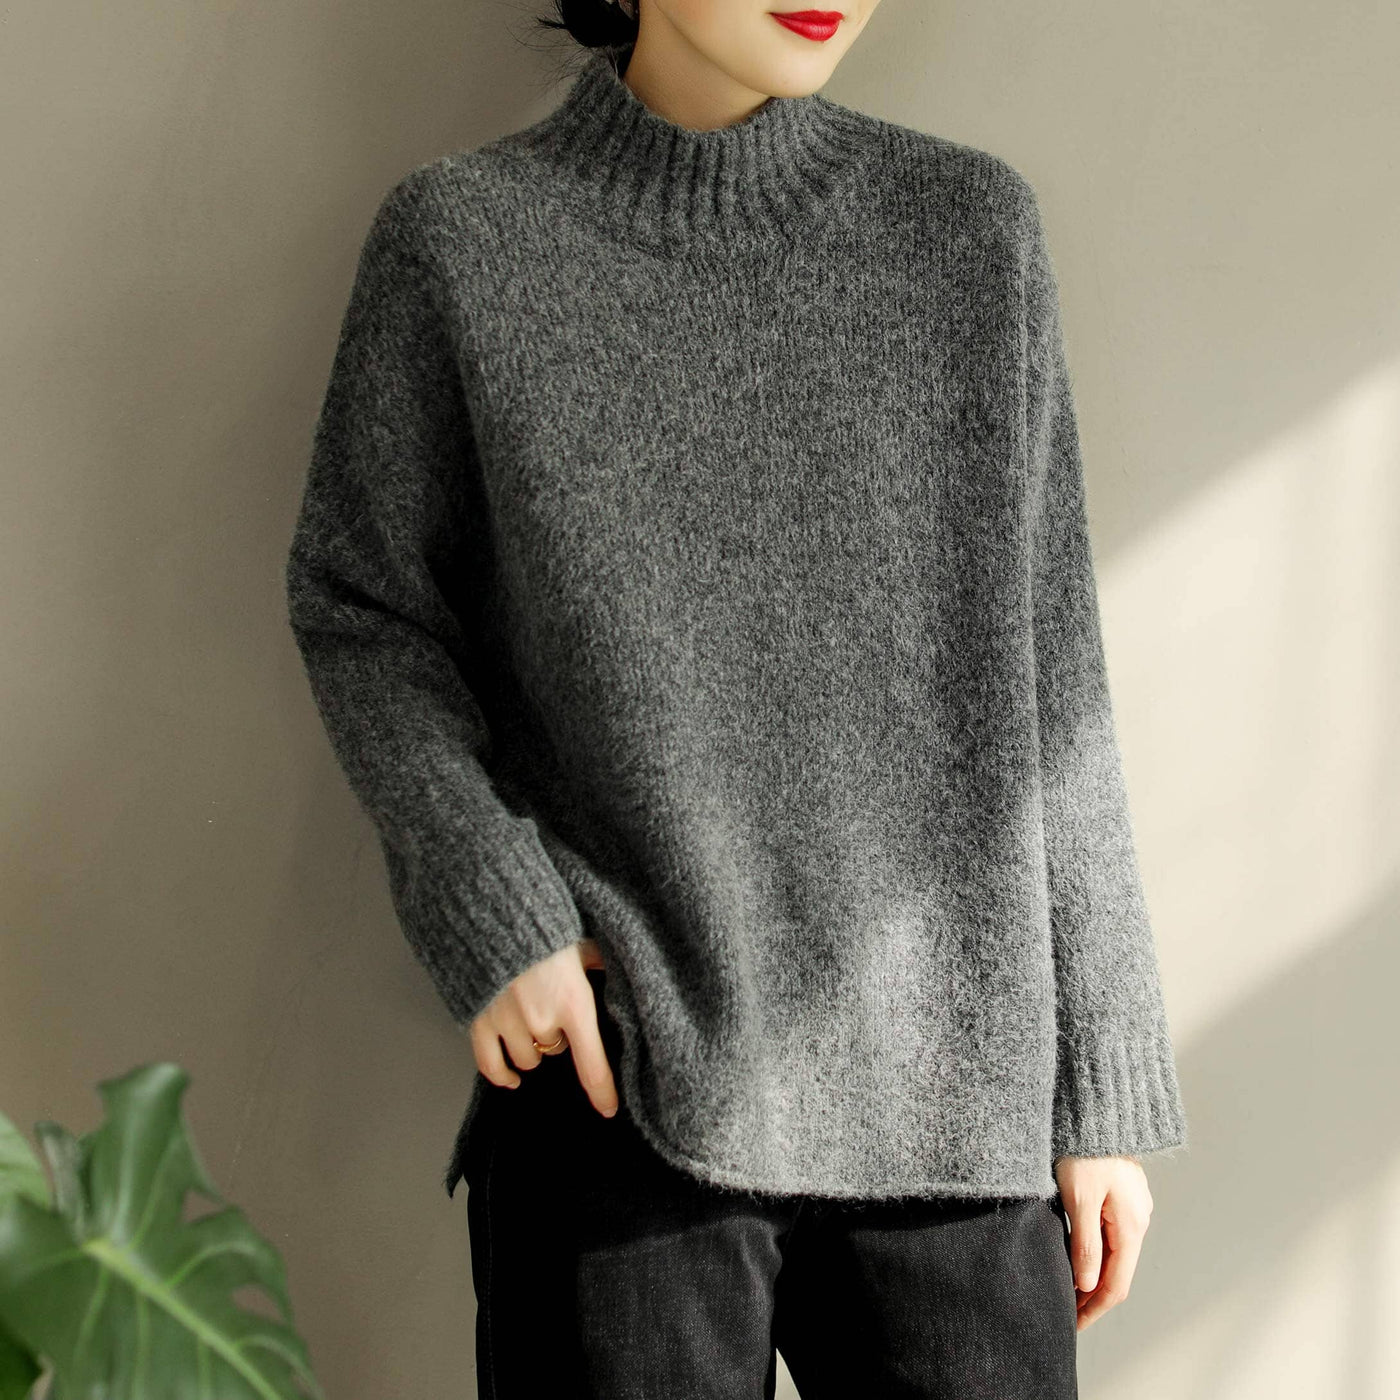 Women Autumn Winter Cotton Knitted Elastic Sweater Nov 2022 New Arrival One Size Dark Gray 